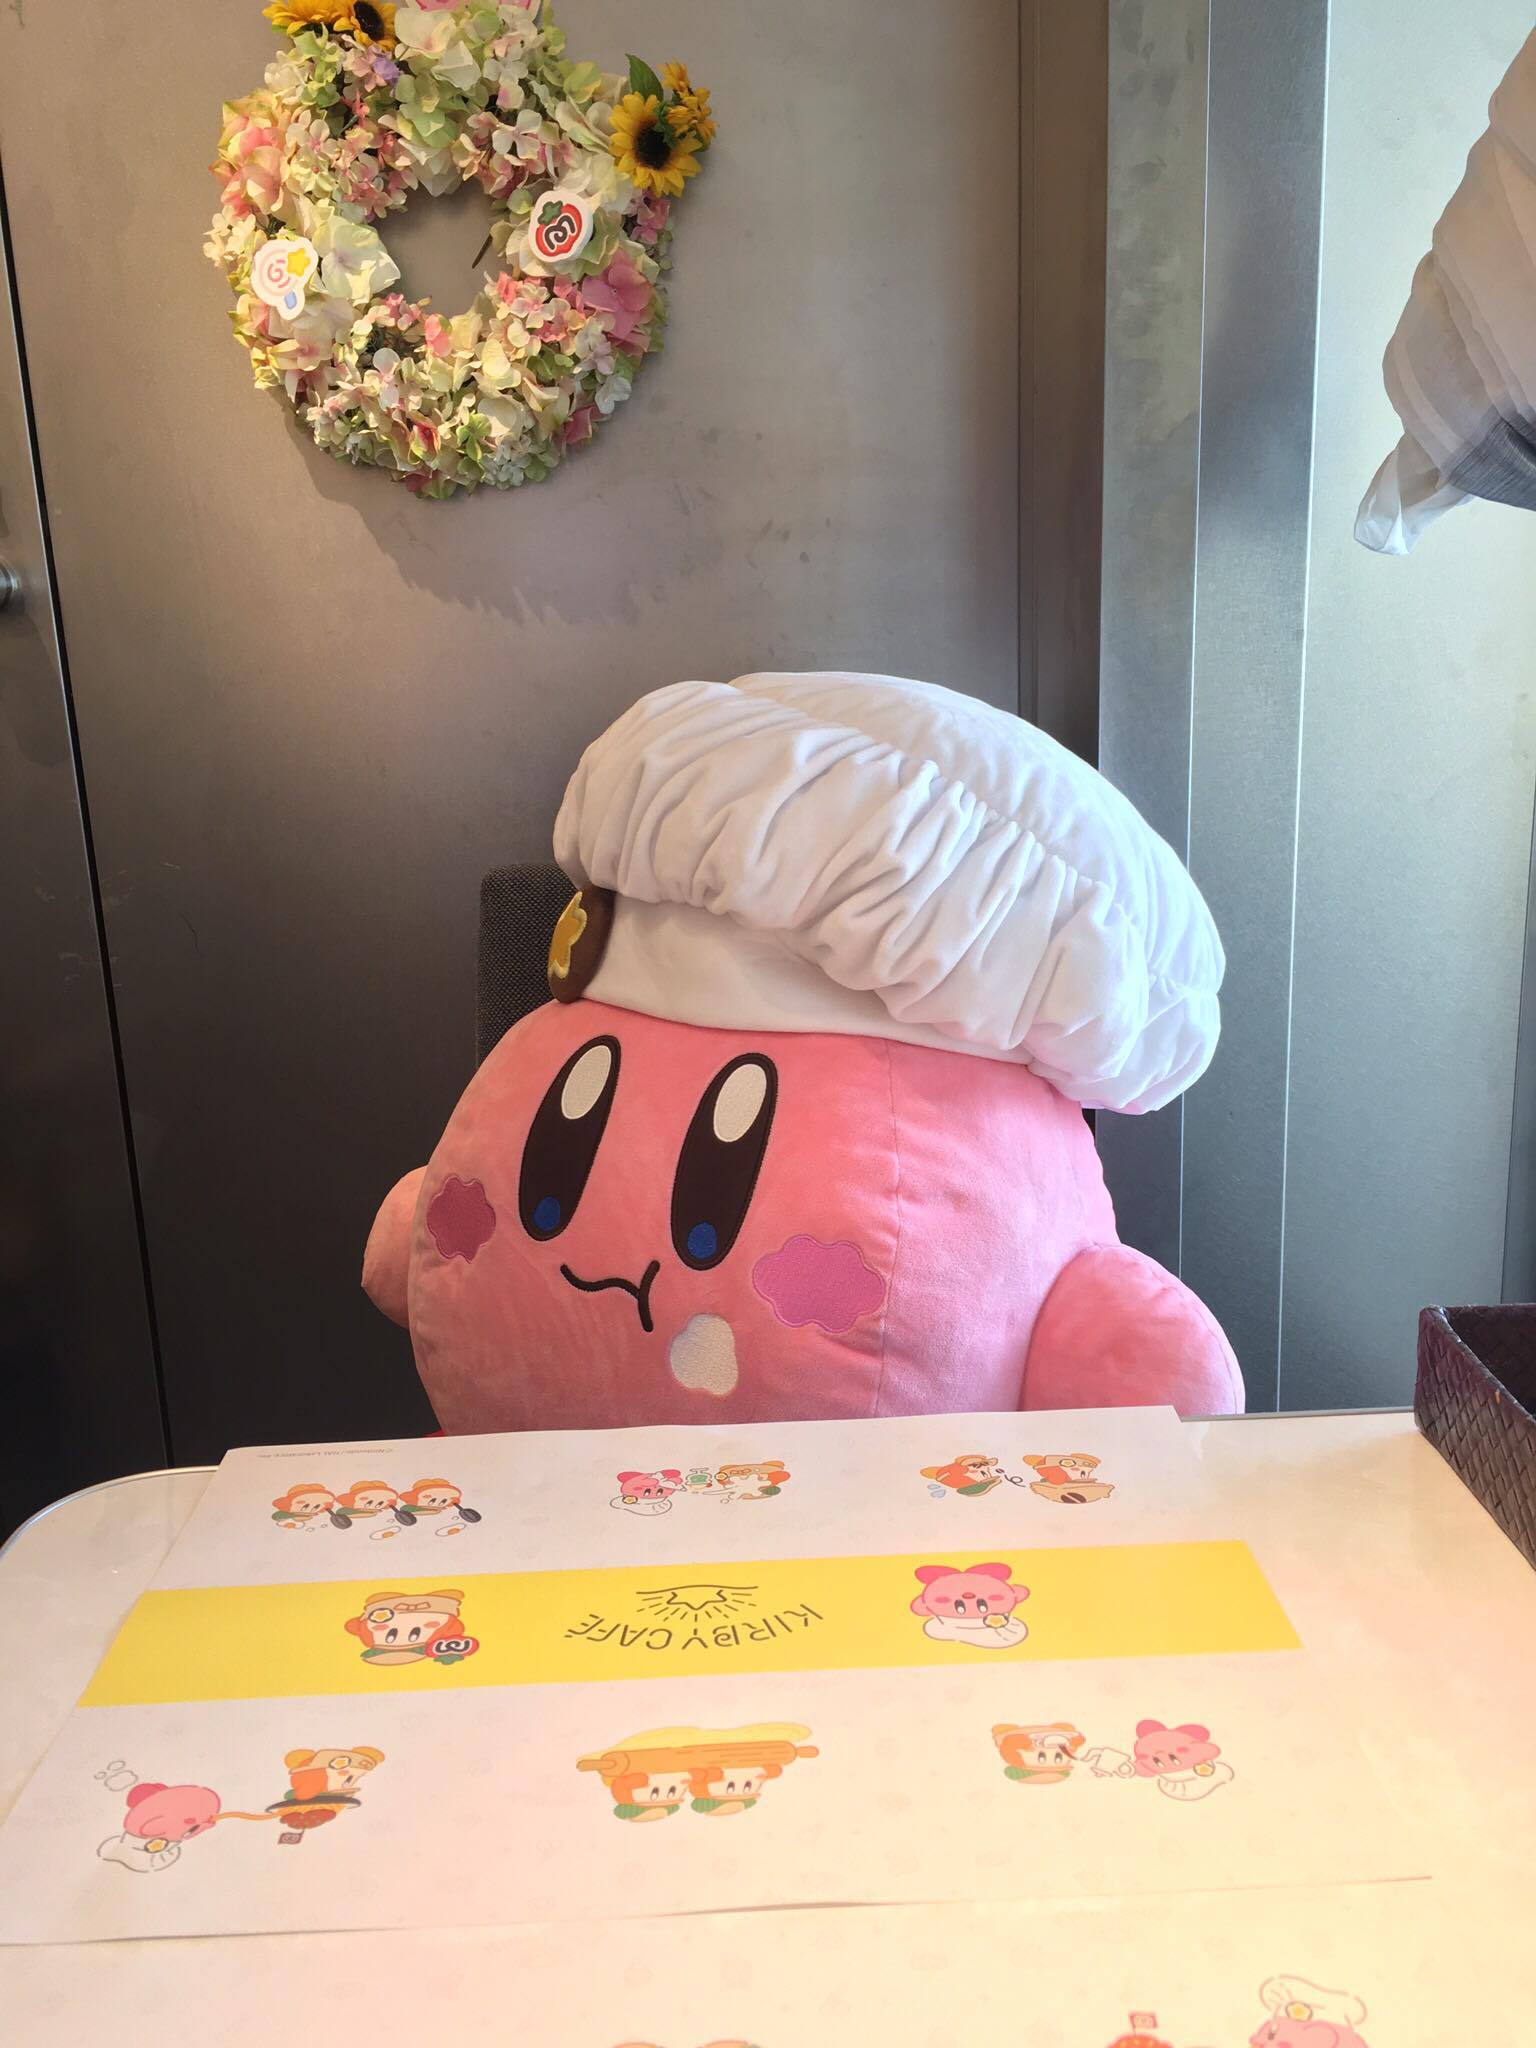 kirby dream buffet cost download free